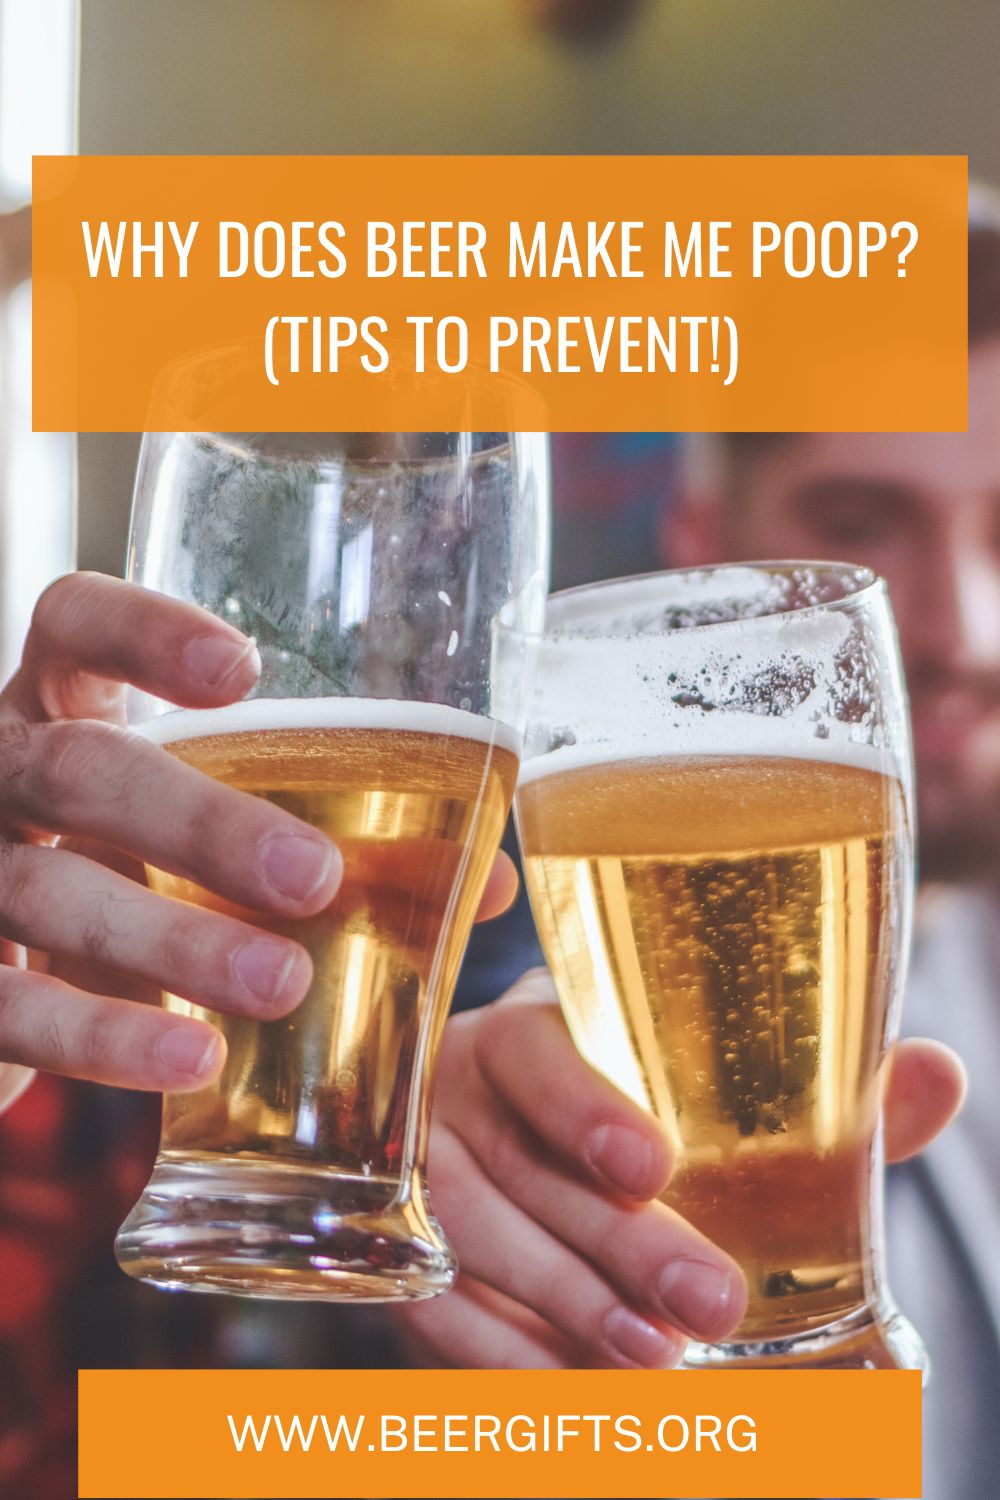 Why Does Beer Make Me Poop? (Tips to Prevent!)1